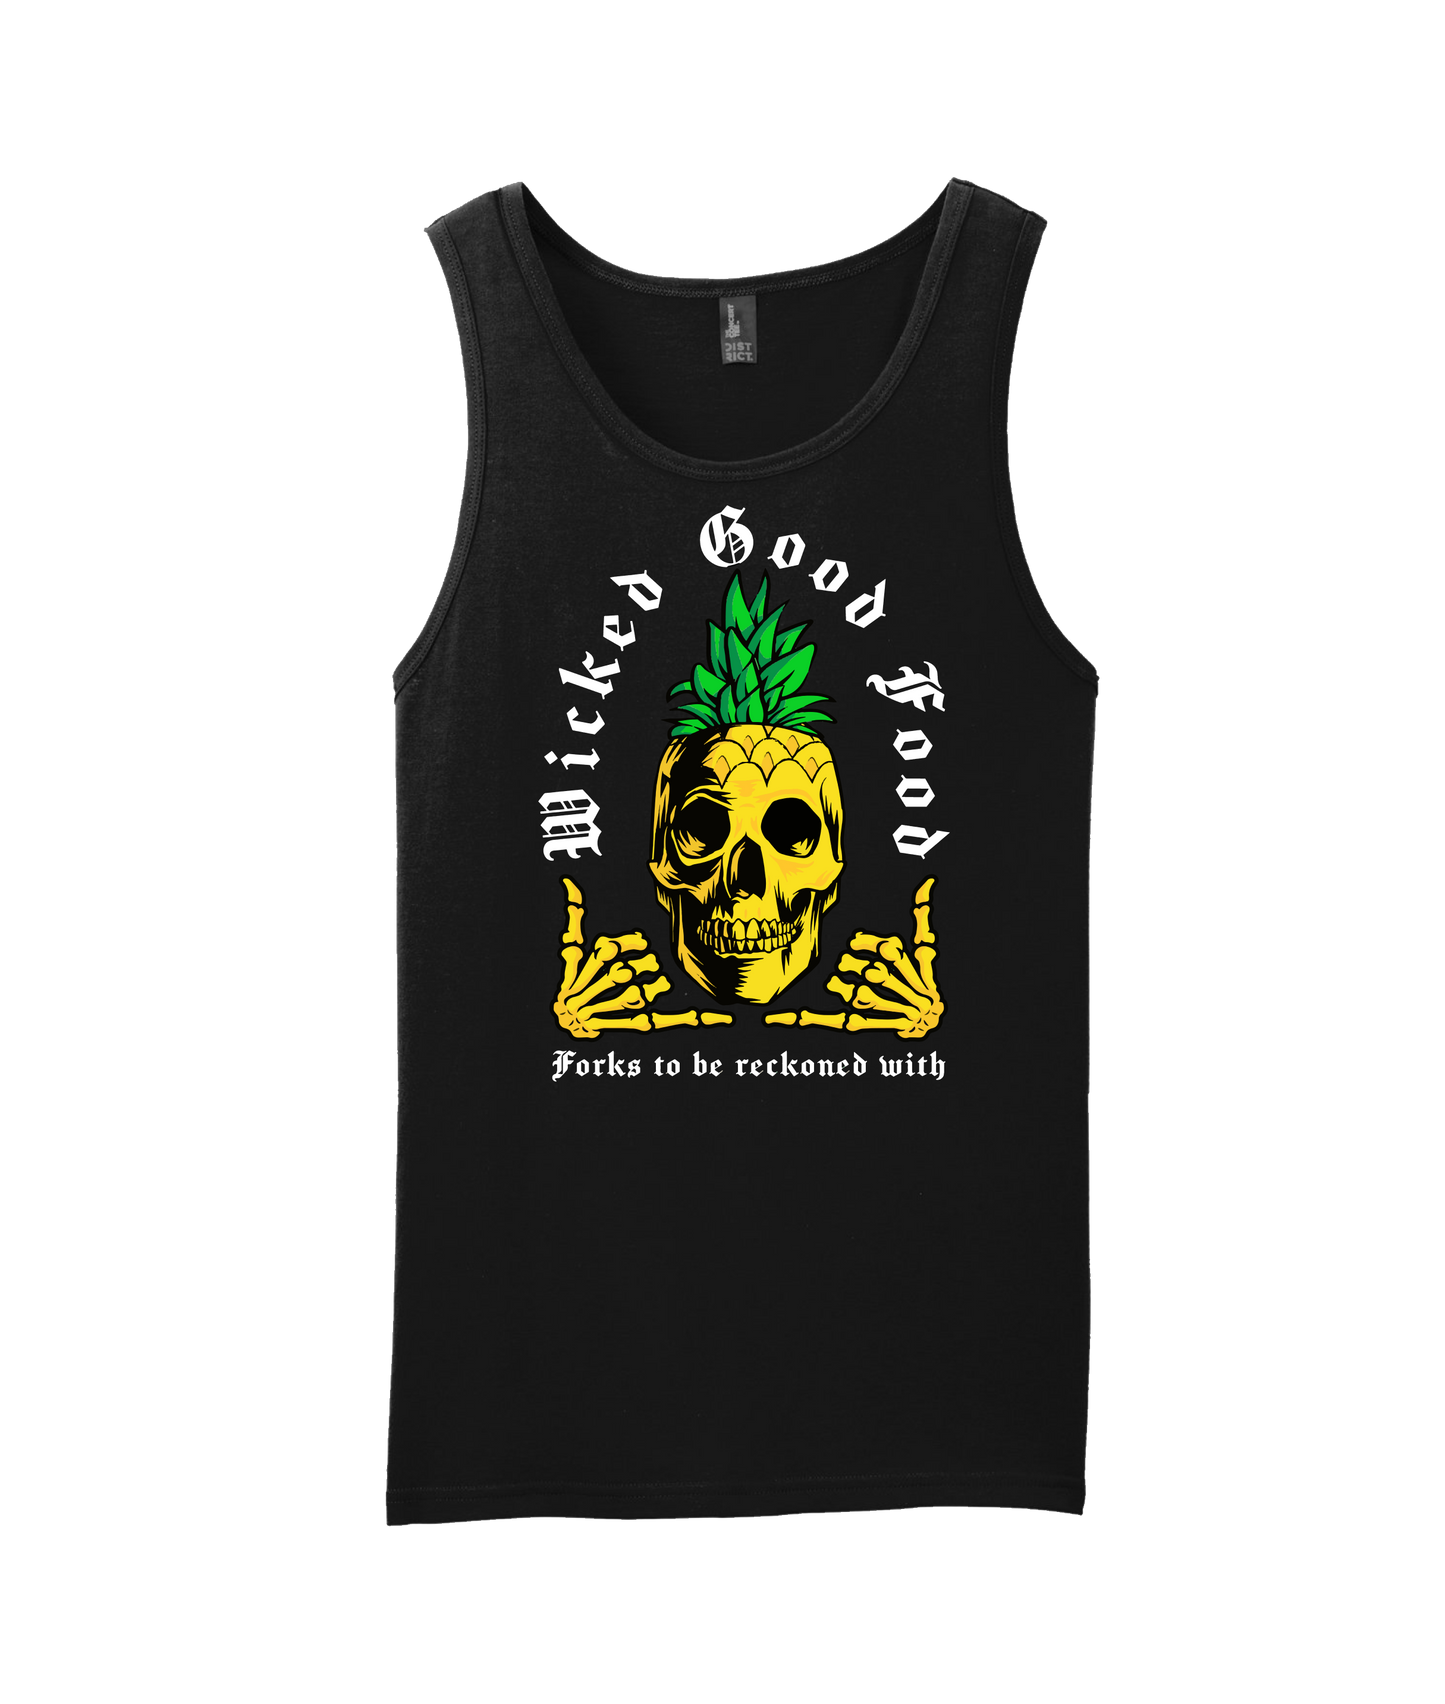 The Wicked Kitchen - Forks to be Reckoned With - Black Tank Top